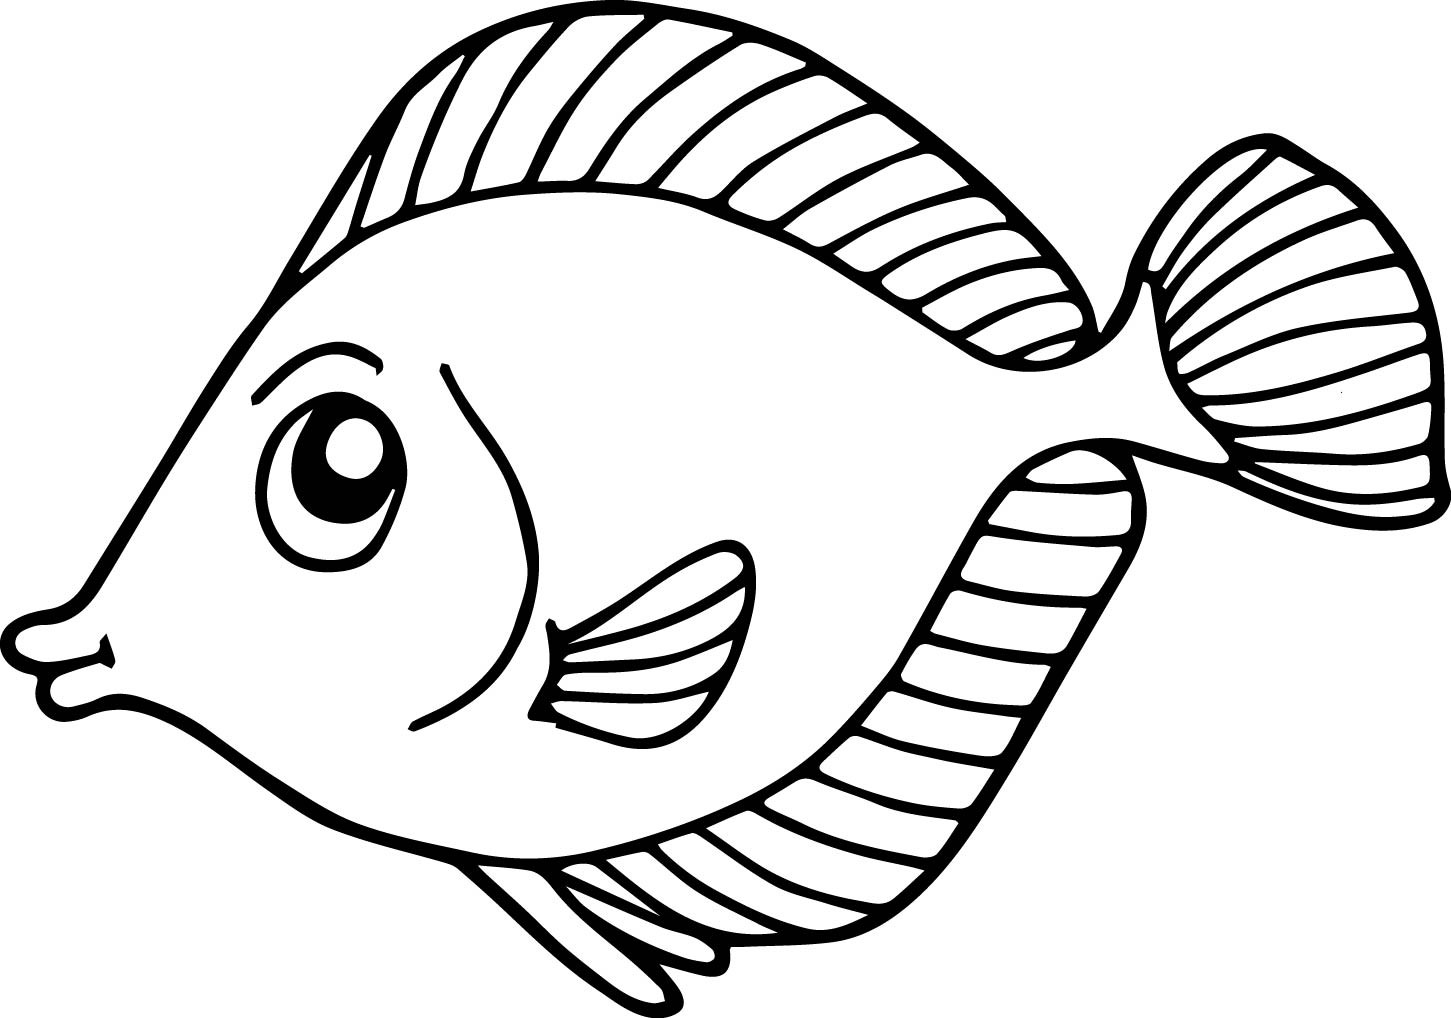 Coloring Pages Of Fish
 Fish Coloring Pages For Kids Preschool and Kindergarten